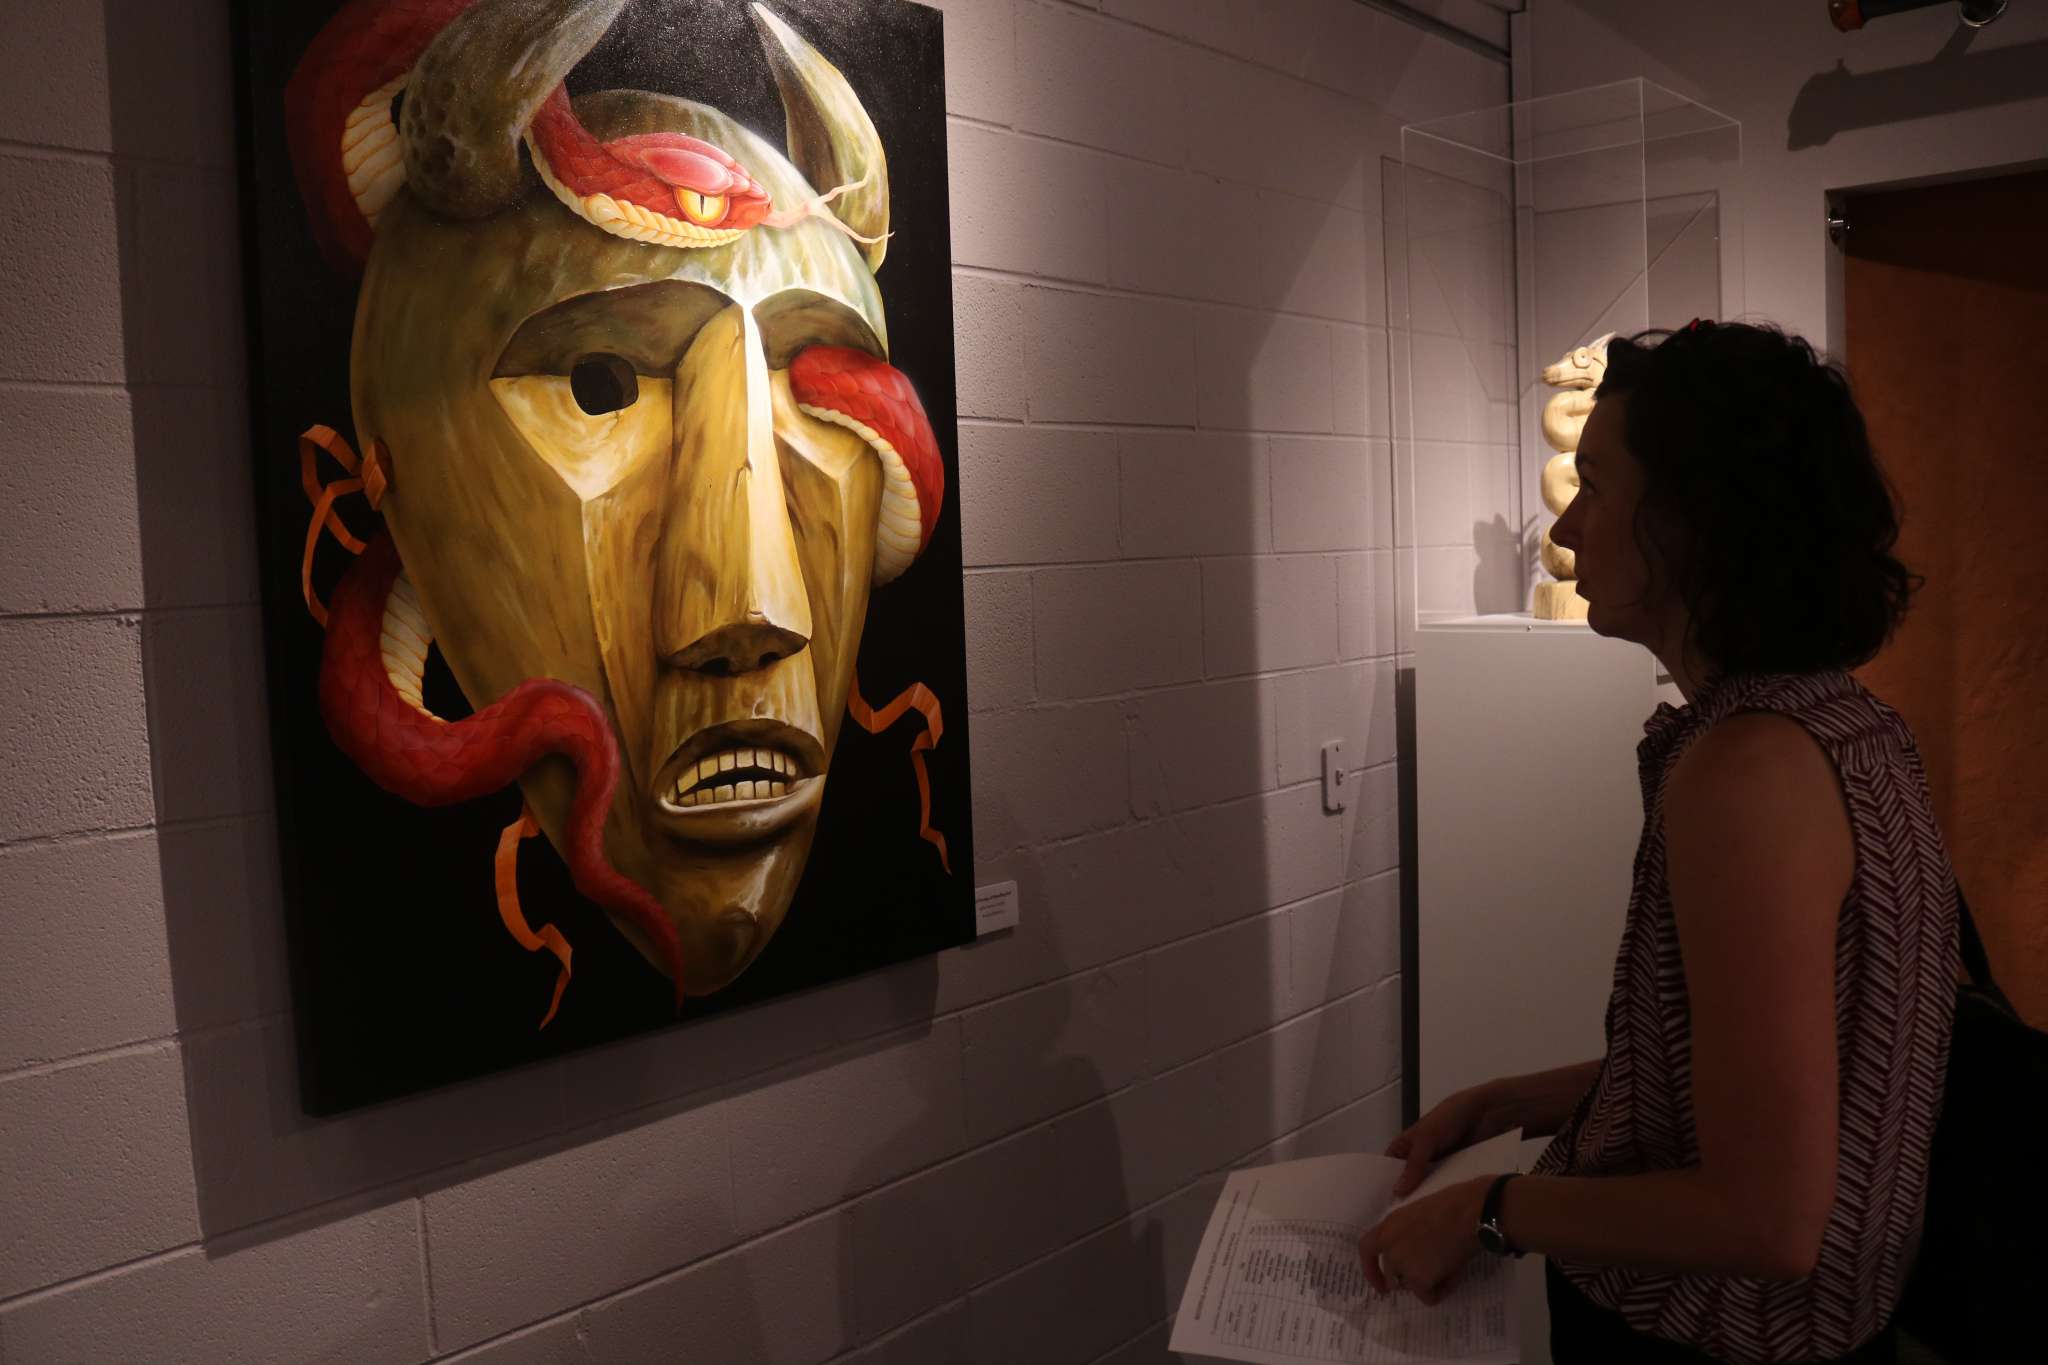 Cherokee Millennial Artists on exhibit at Museum of the Cherokee Indian